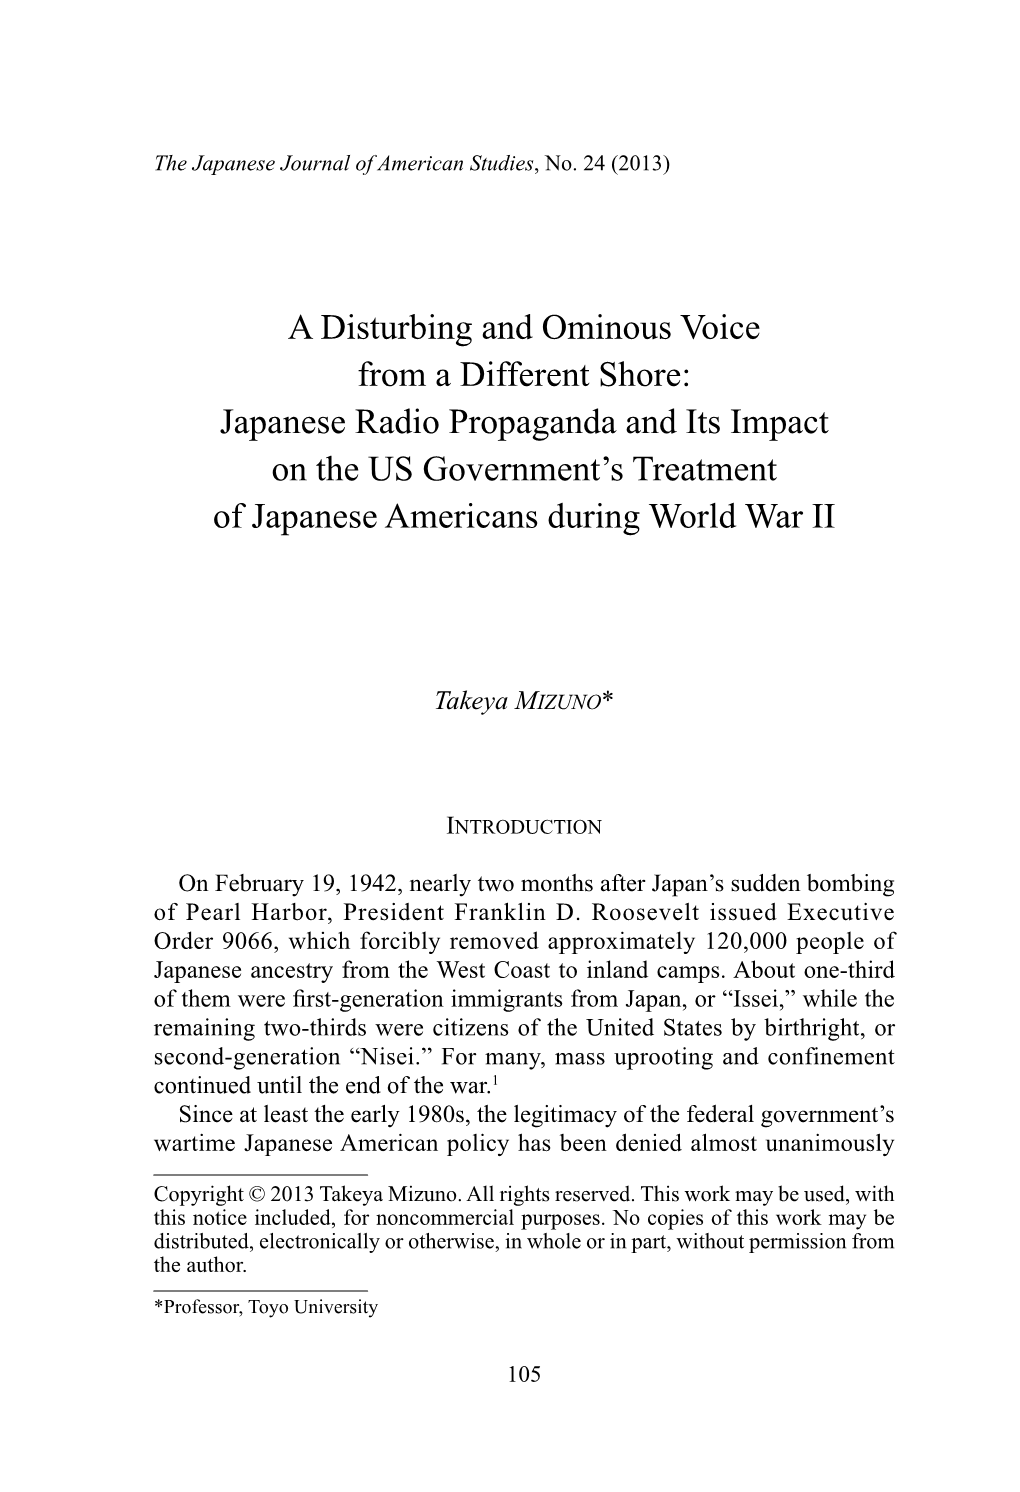 Japanese Radio Propaganda and Its Impact on the US Government's